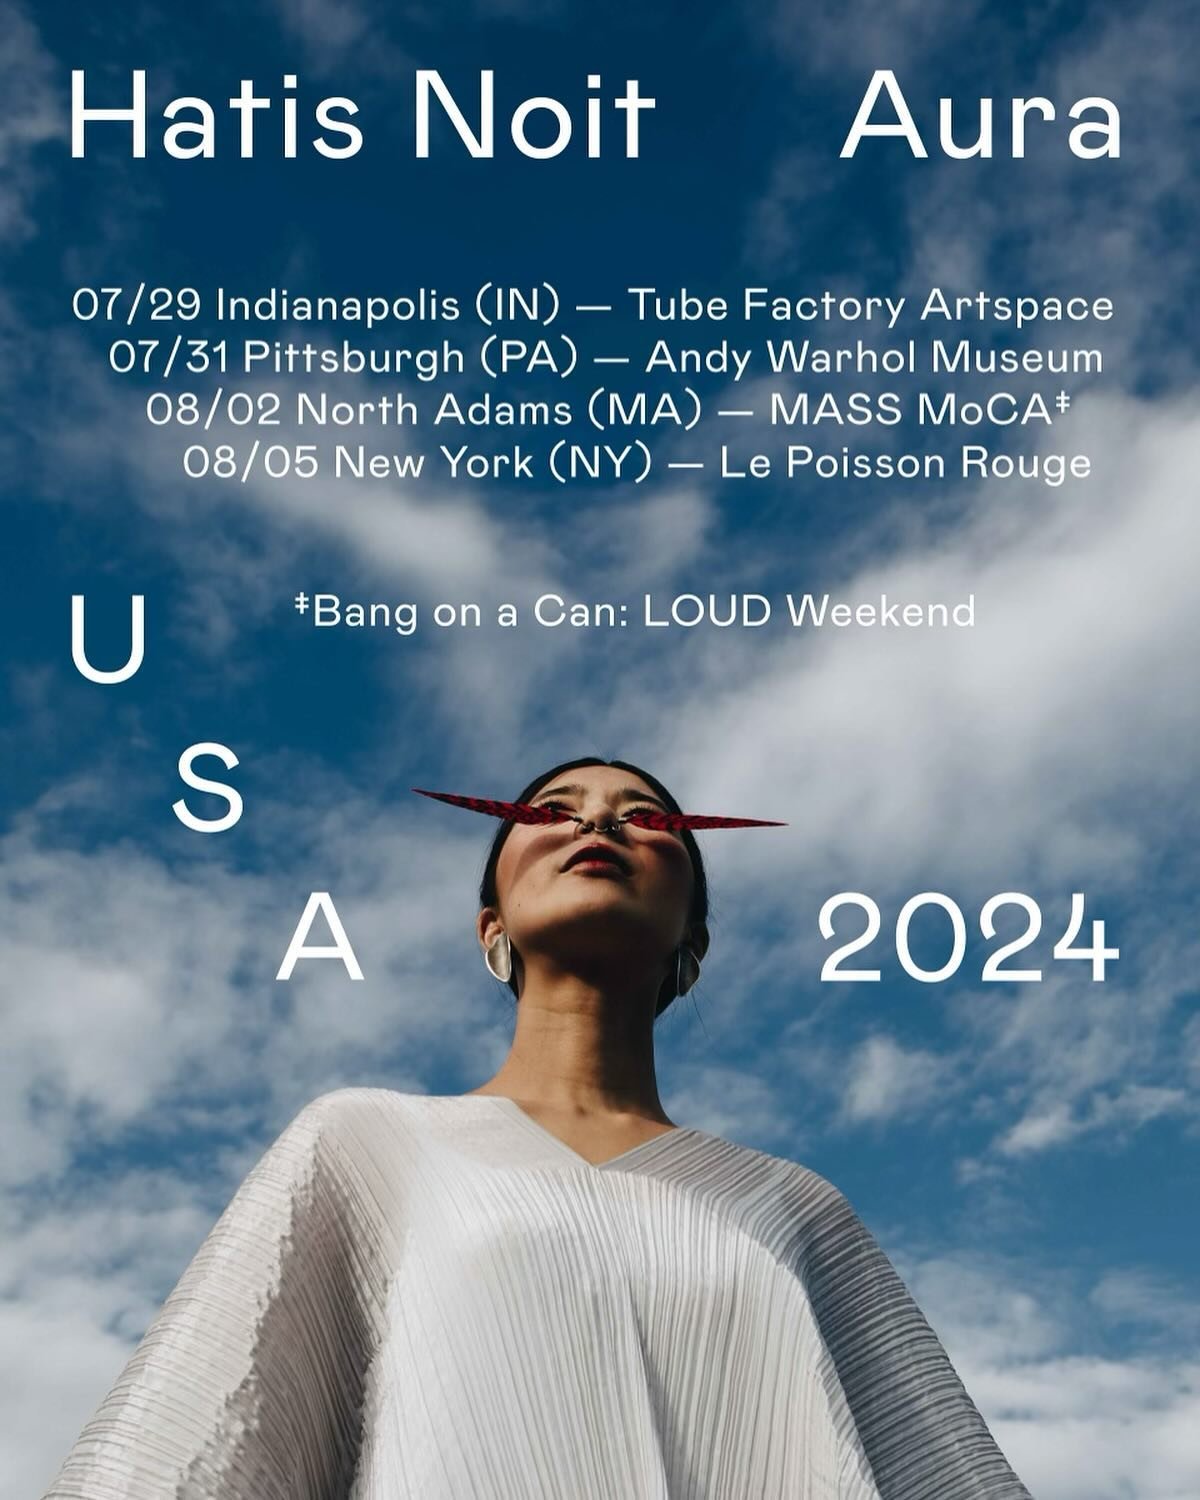 We are excited to be a stop on the Hatis Noit &ldquo;Aura&rdquo; USA tour! 🌞

Tickets go on sale today (April 18) at 12 p.m. 🌤️

There isn&rsquo;t a more unique entry into a musical journey than that of Japanese voice artist Hatis Noit. Her musical